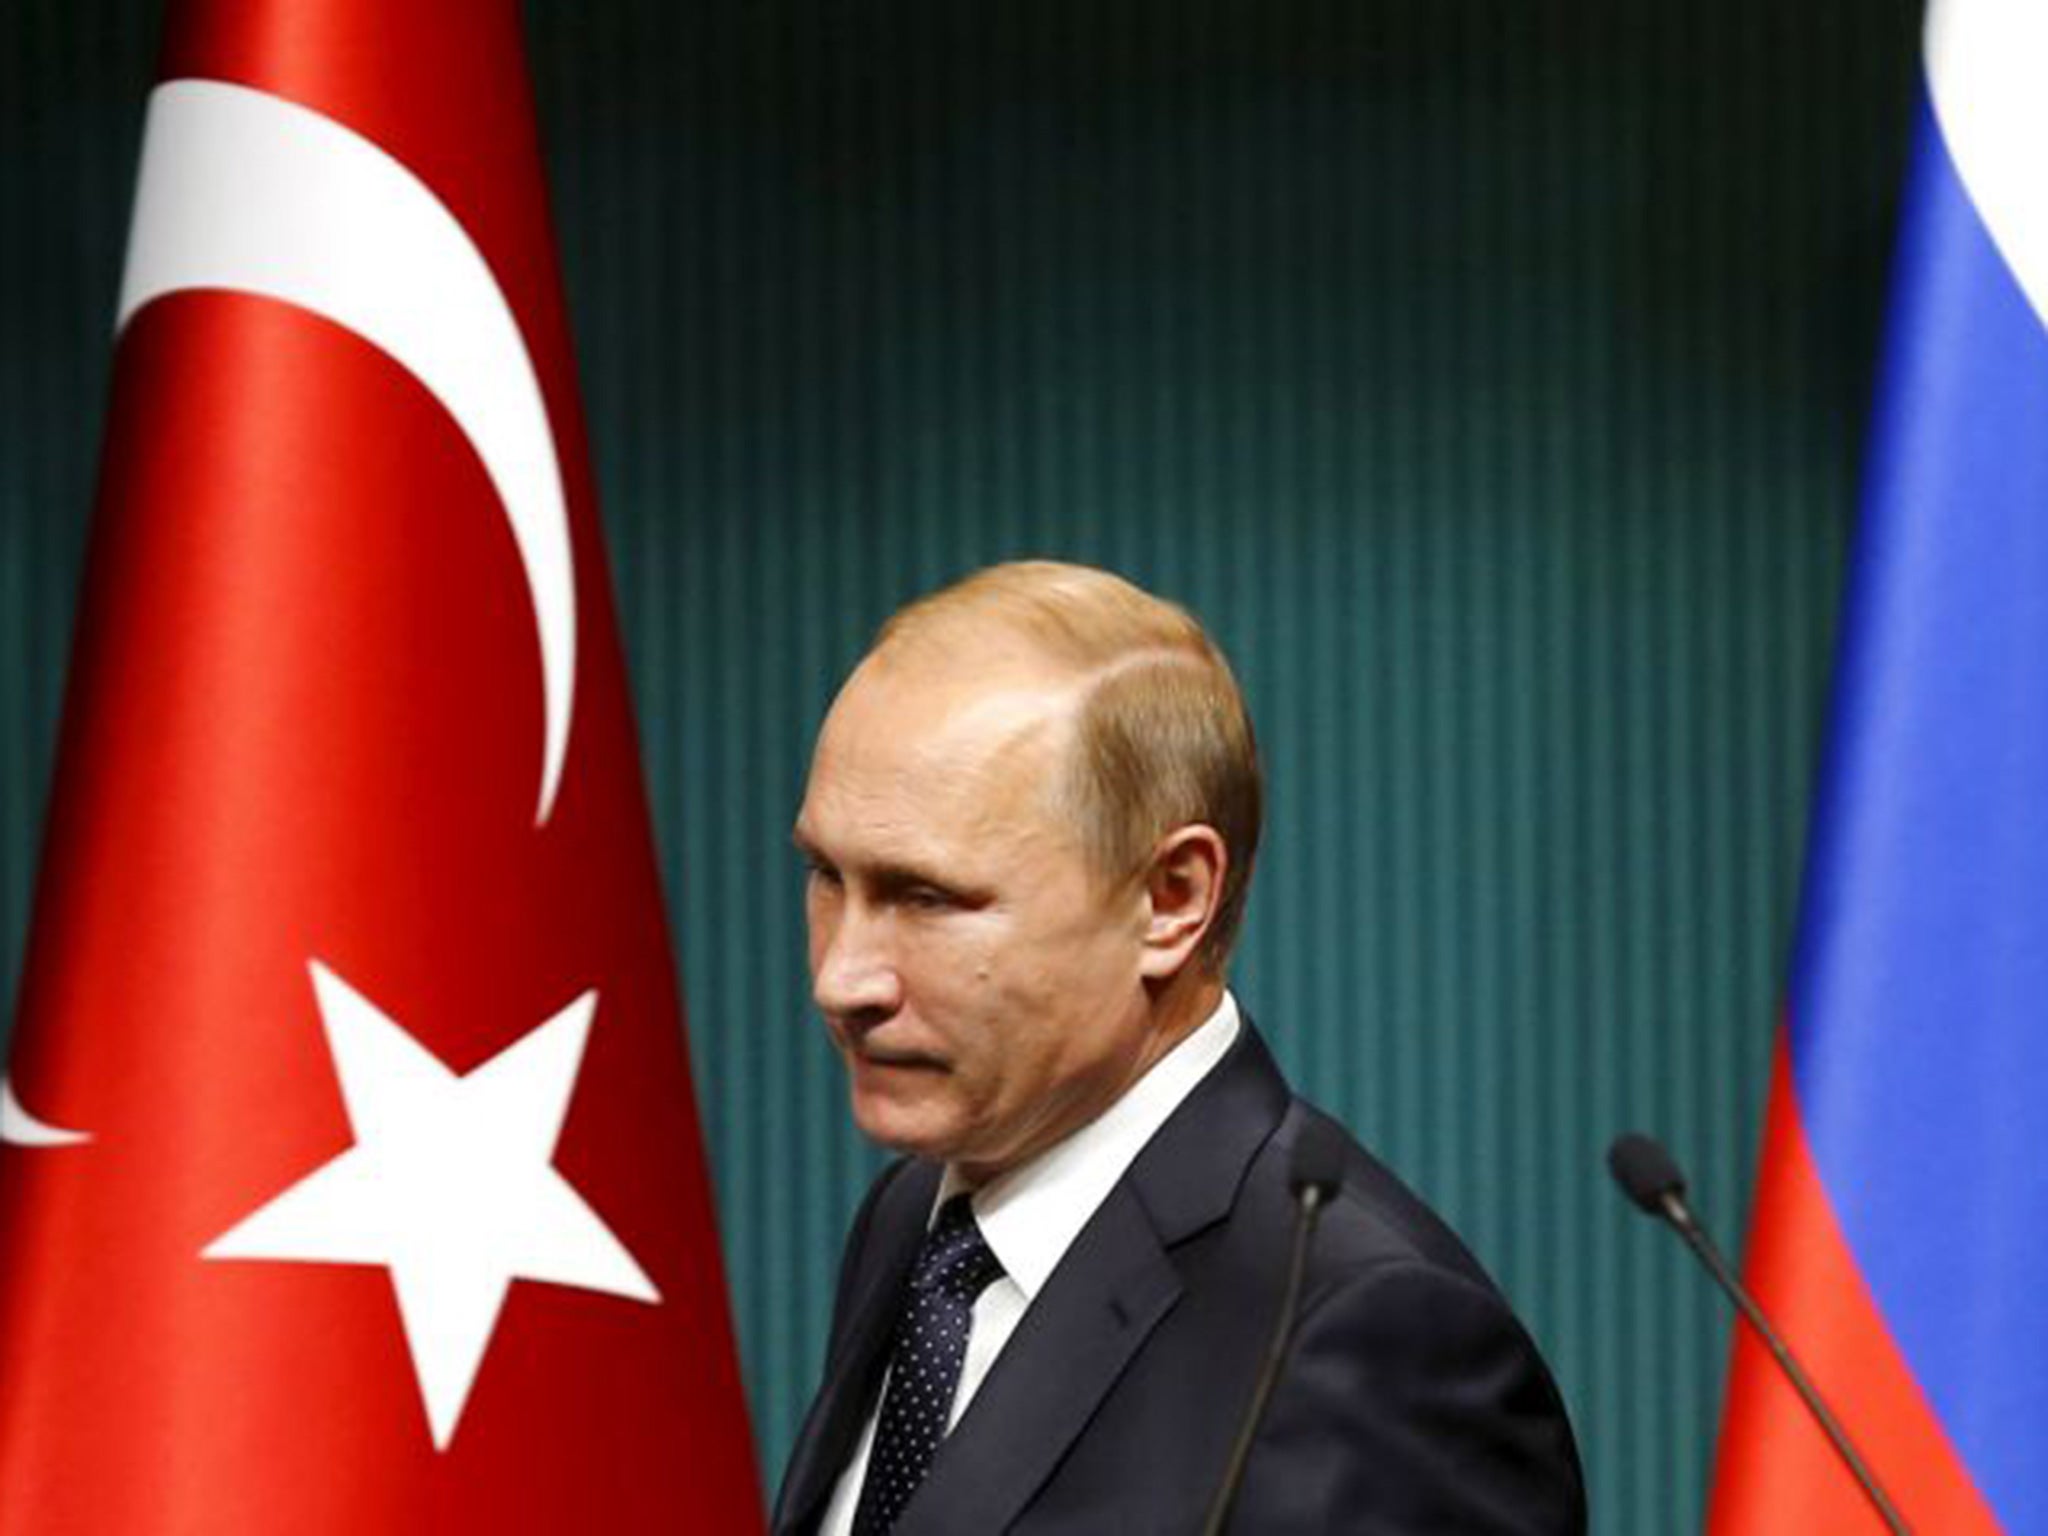 Vladimir Putin has signed a decree imposing a number of sanctions against Turkey